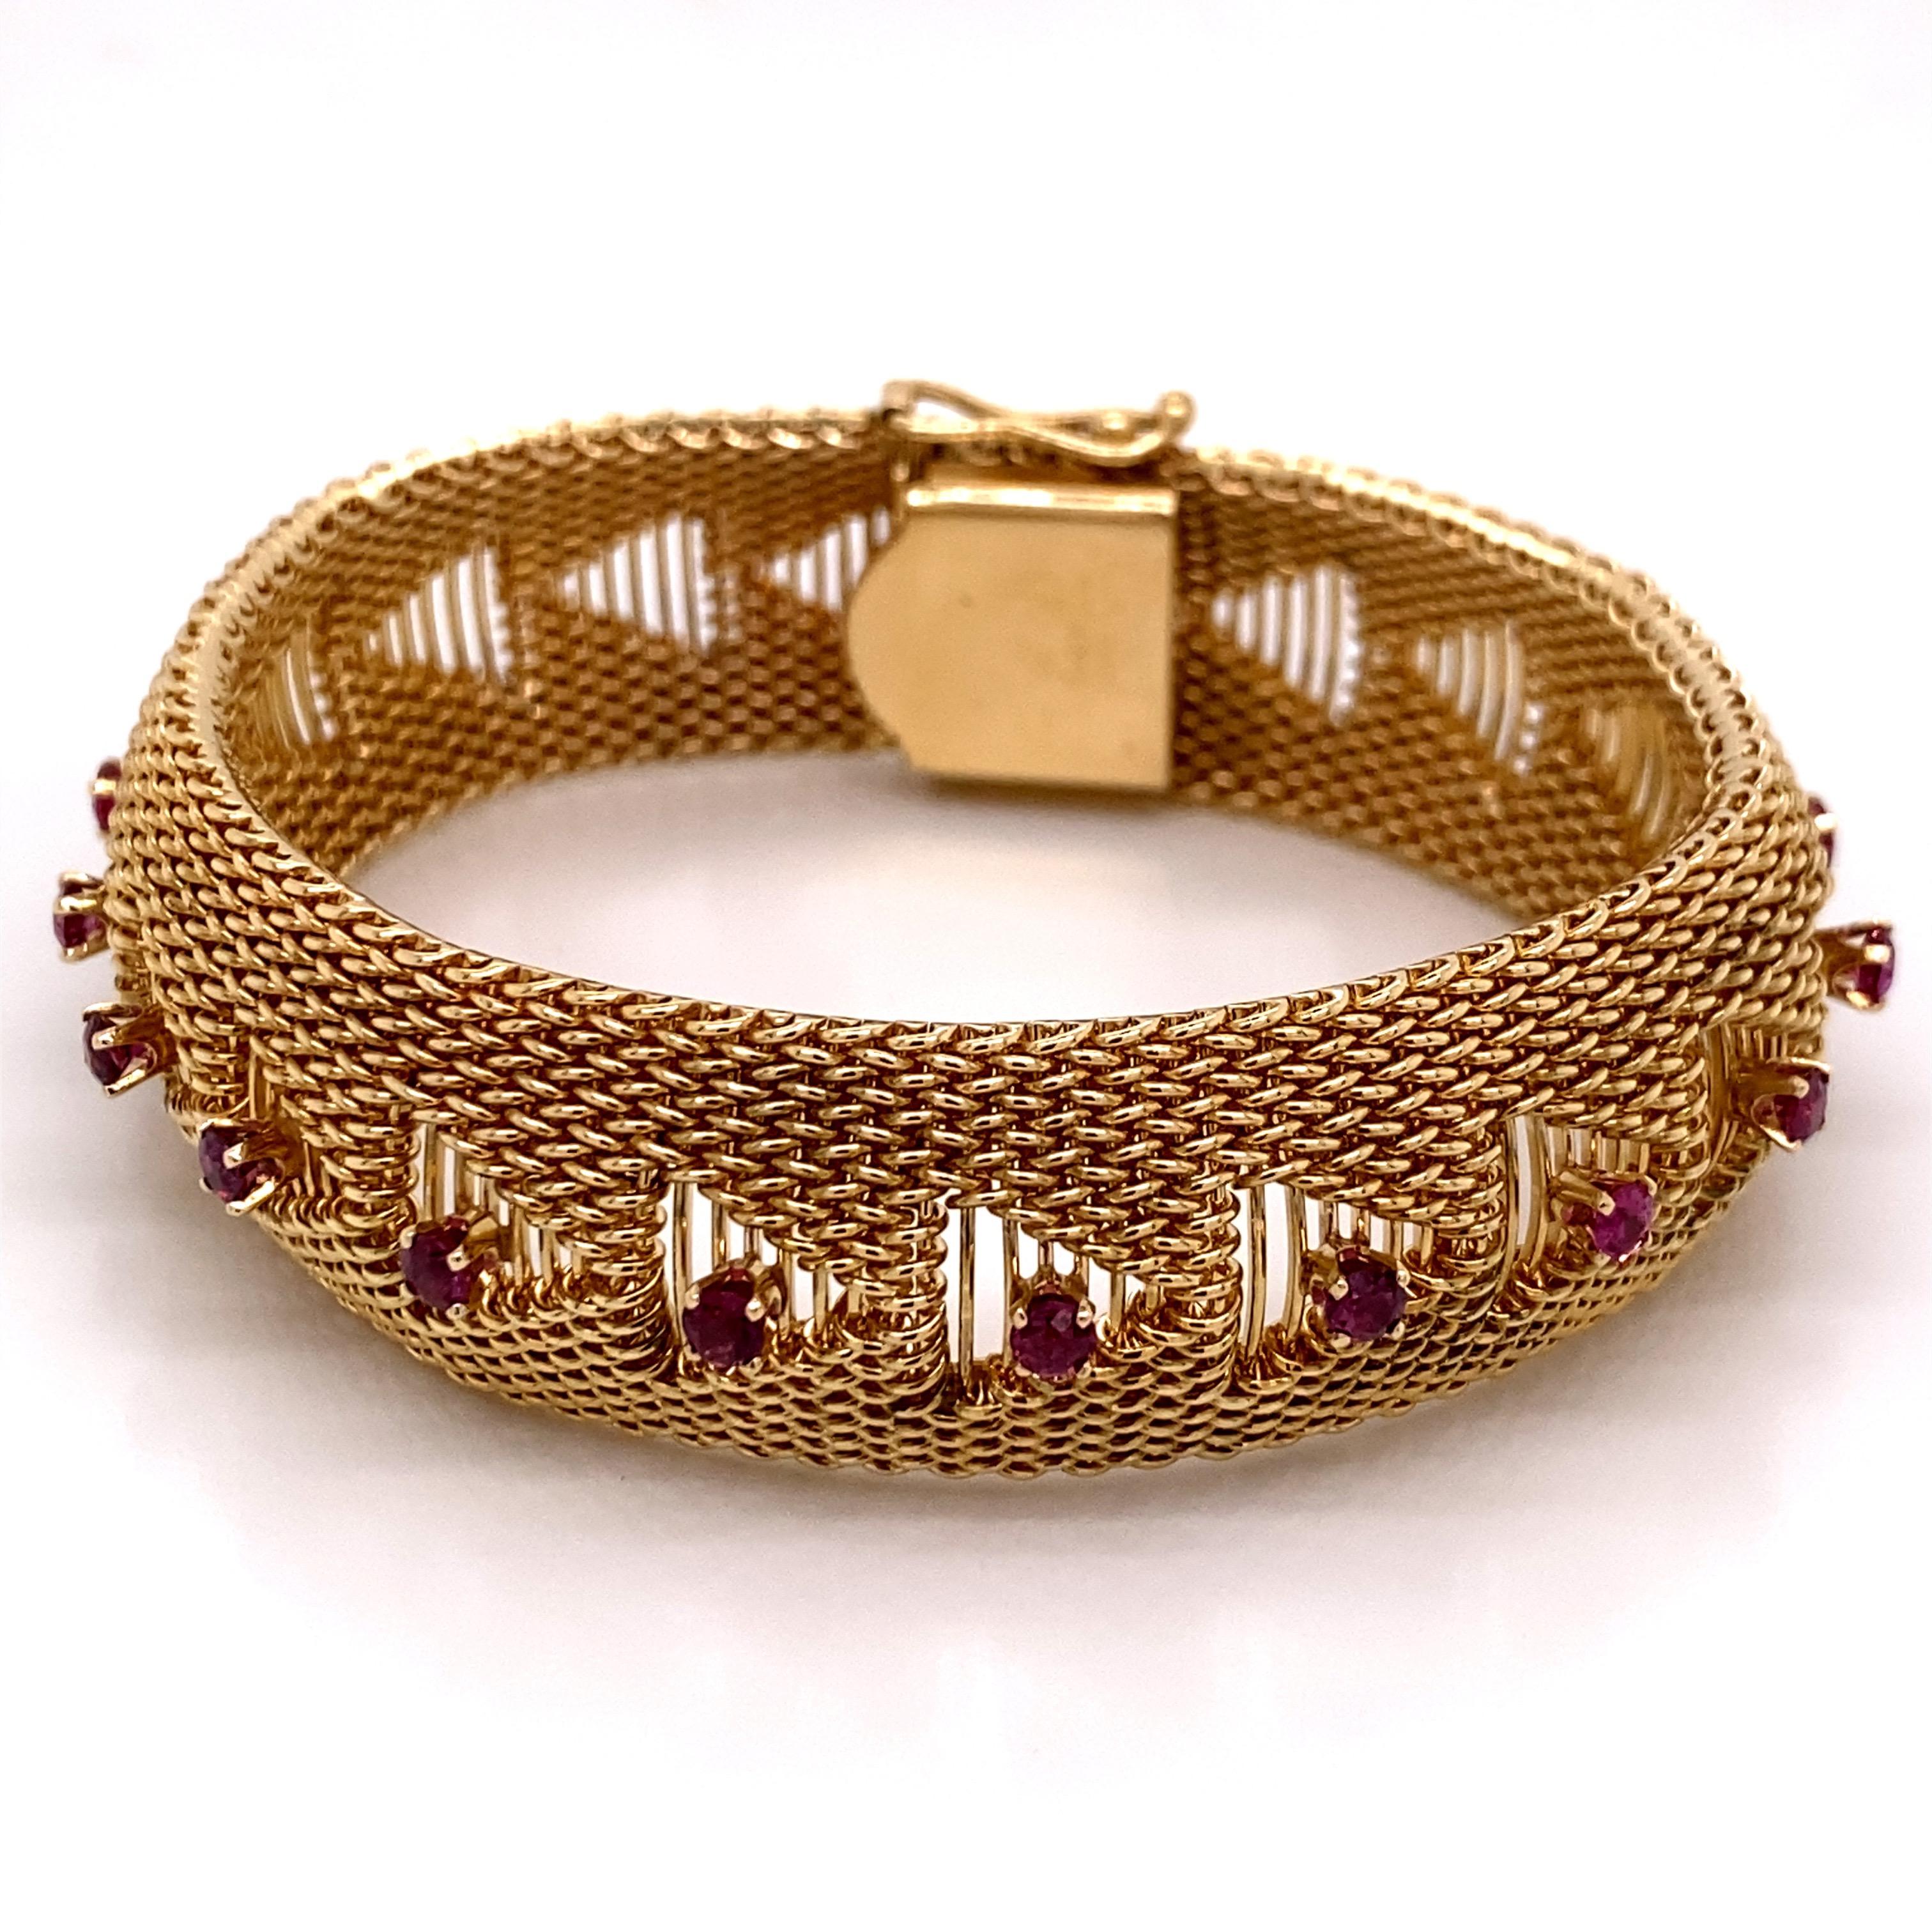 Vintage 1960s 14K Yellow Gold Mesh Bracelet with Enamel Flowers and Rubies - The bracelet measures 7 inches long and .6 inches wide in the center. The 12 Rubies are set in 4 prong heads and weigh approximately 1.25ct. The bracelet features a hidden